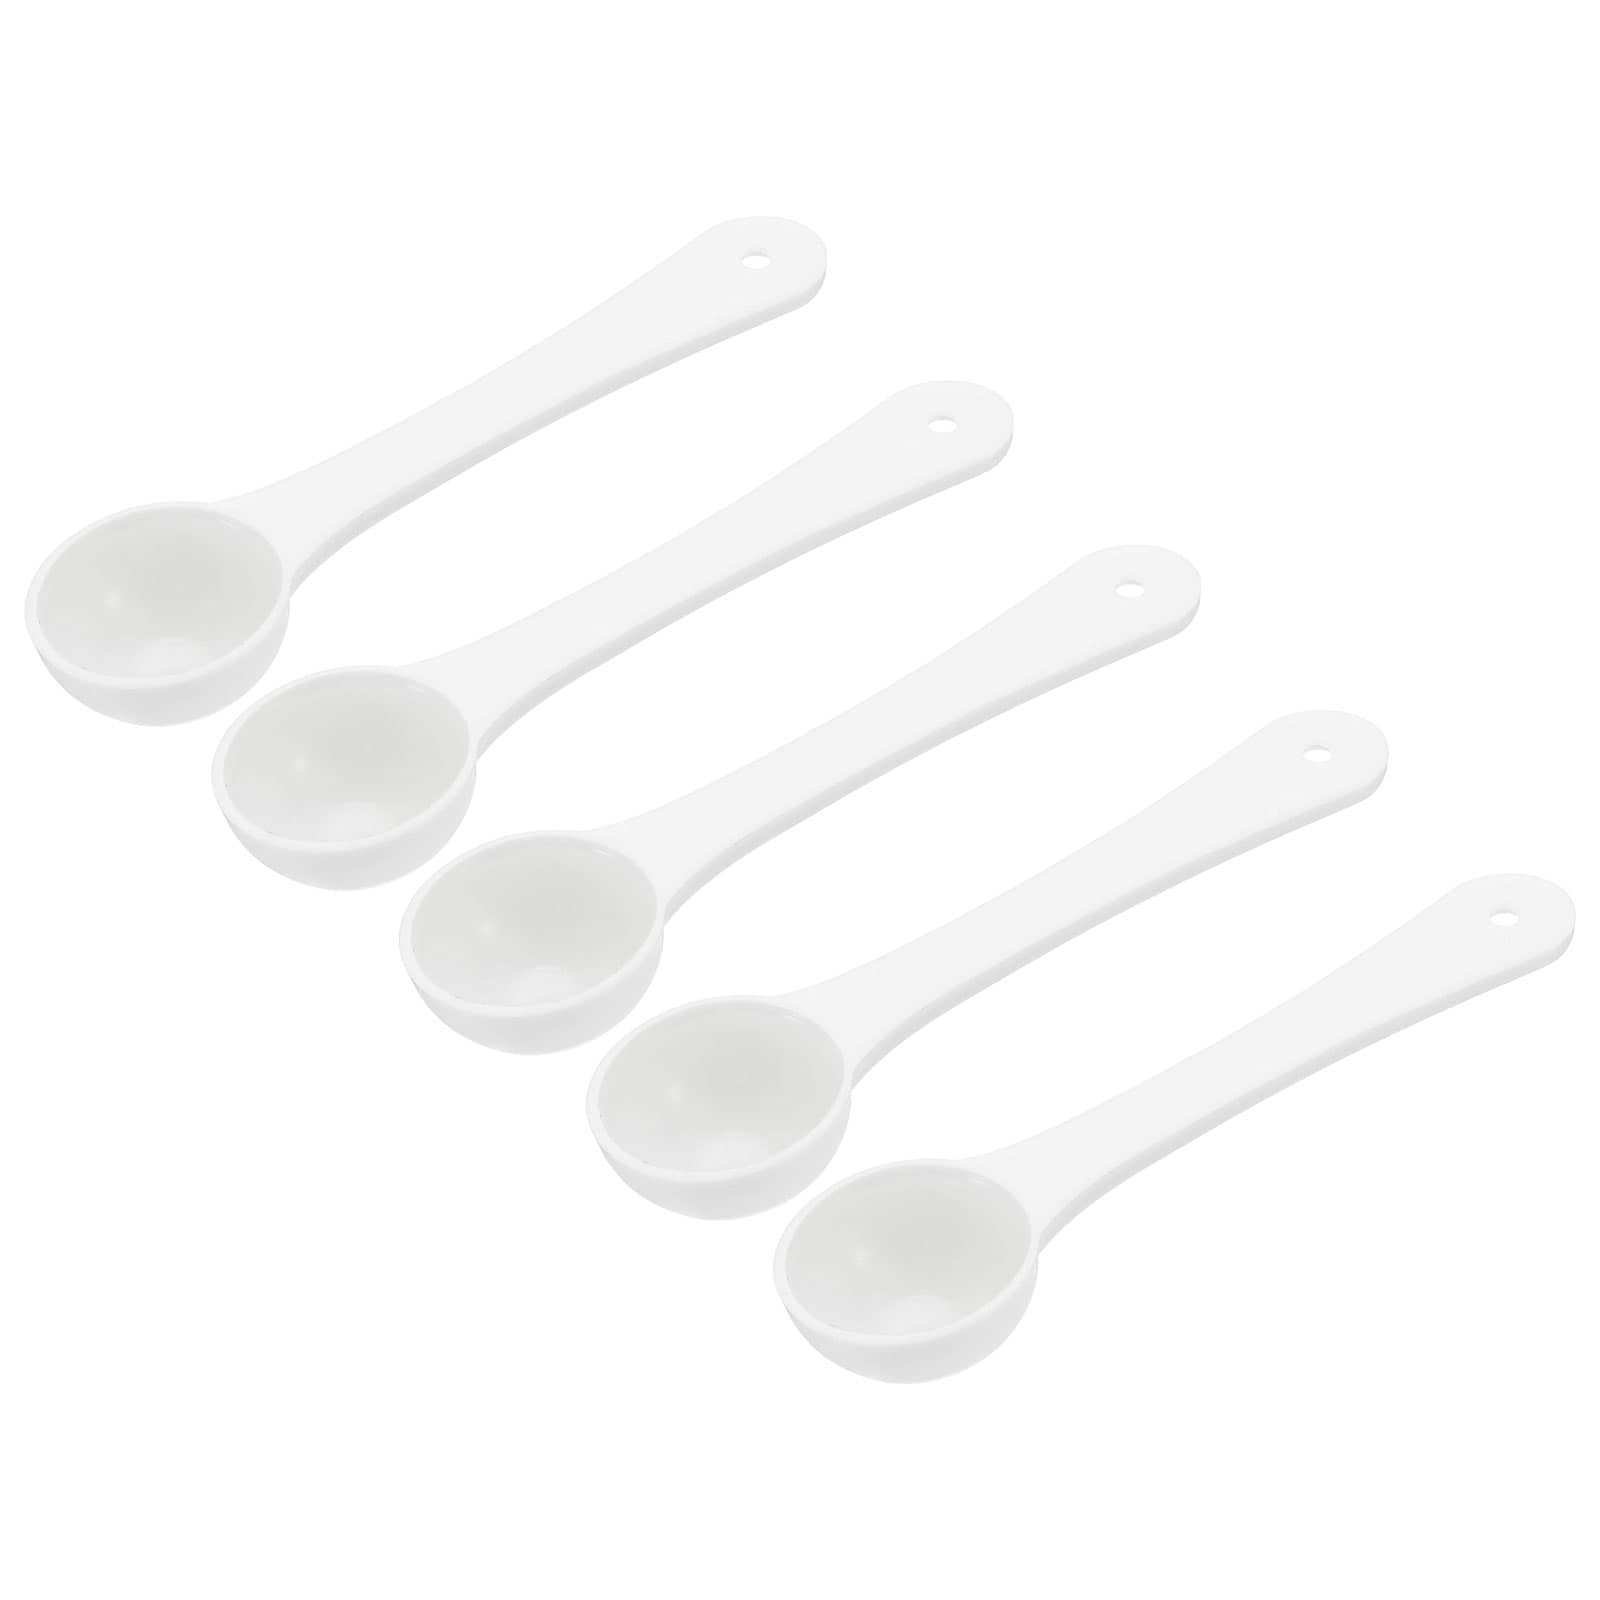 https://ak1.ostkcdn.com/images/products/is/images/direct/af8f22d7d72c7e289e8d0c186baa858f4c86a986/Micro-Spoons-1-Gram-Measuring-Scoop-Plastic-Round-Bottom-with-Hanging-Hole-15Pcs.jpg